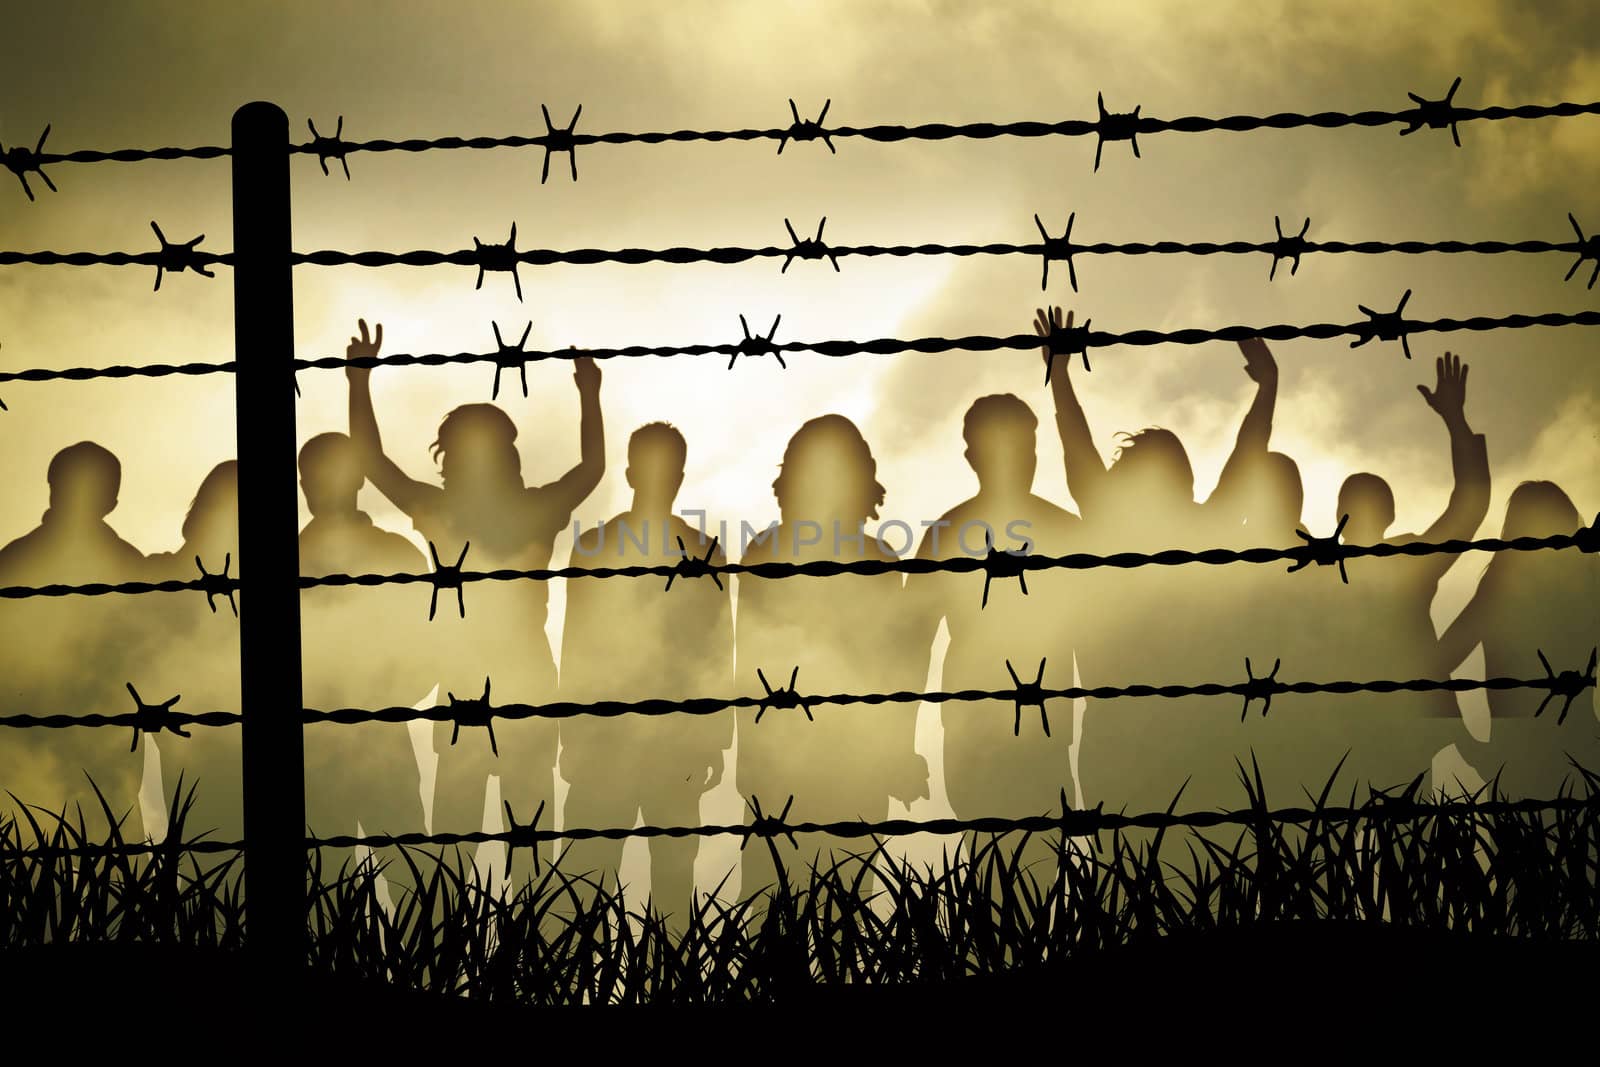 people are captured behind barbed wire